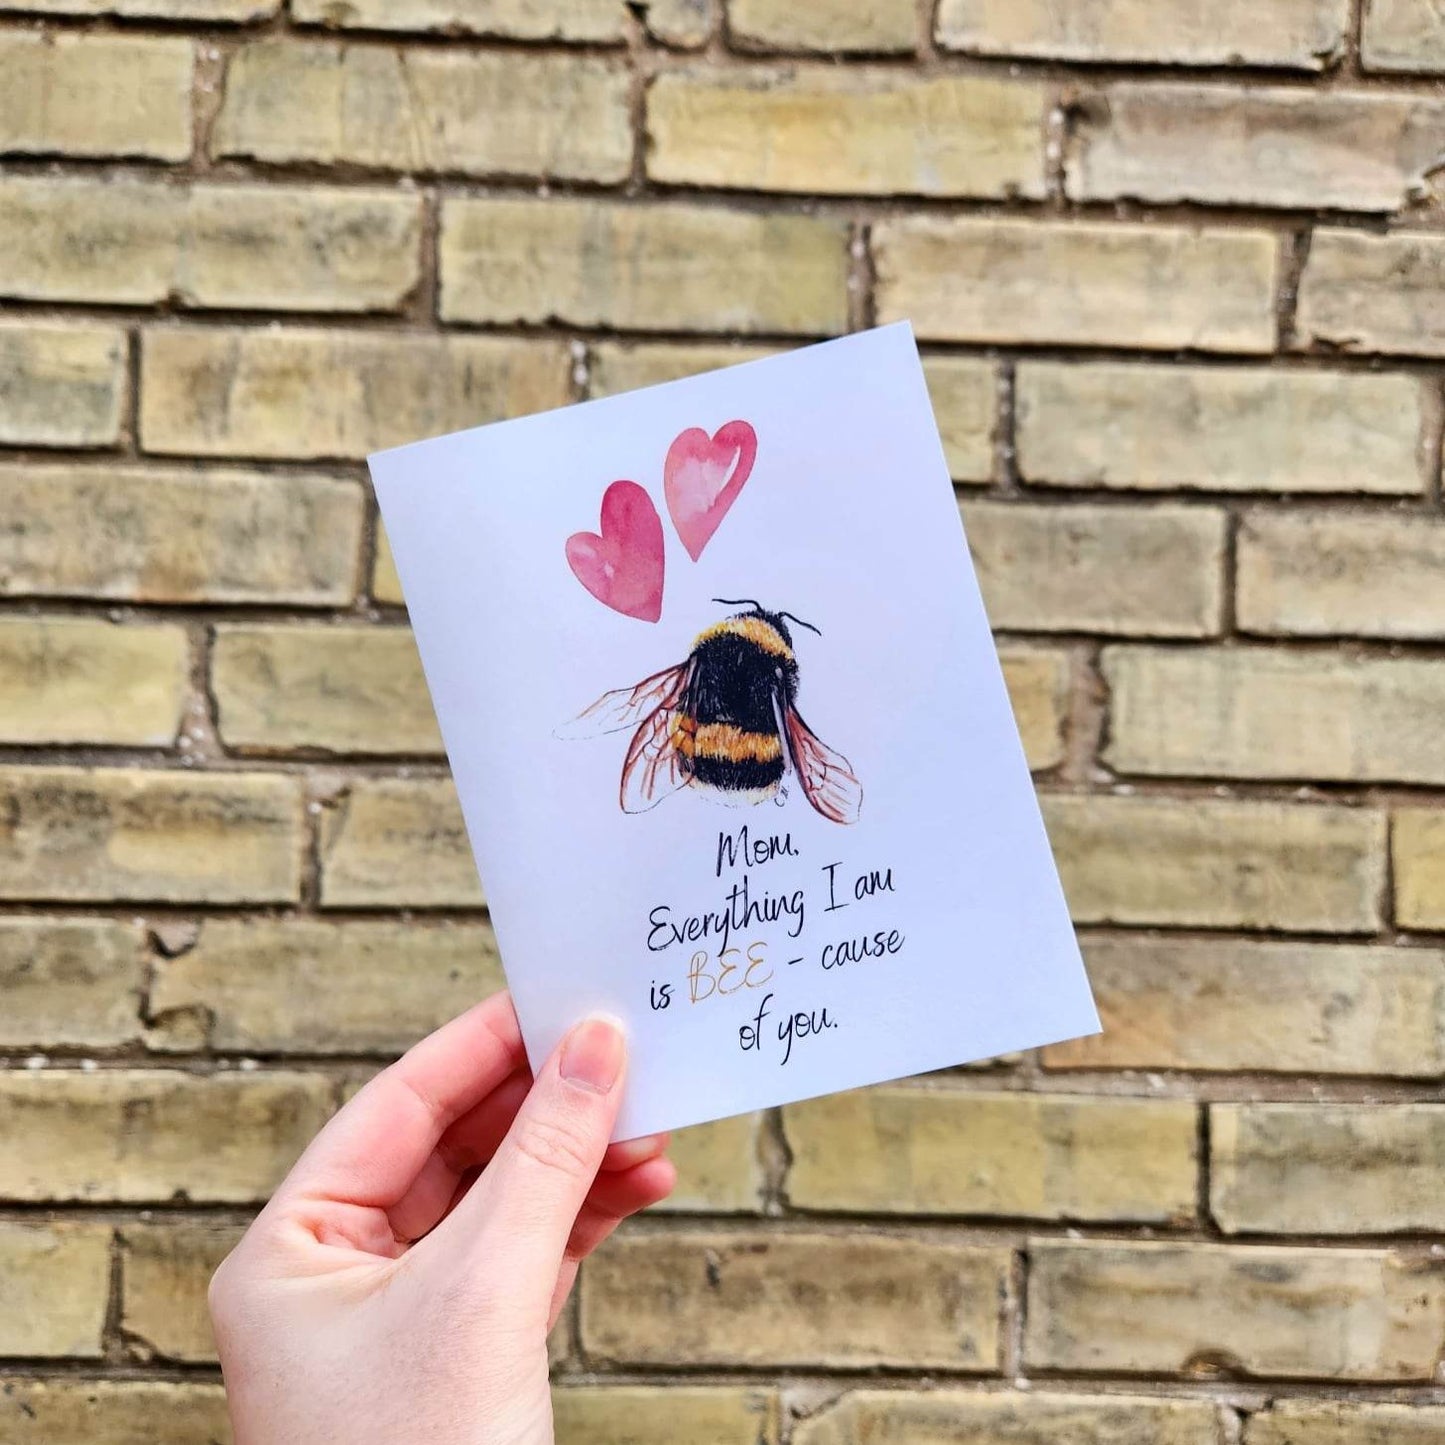 Mom everything I am is because of you, Bee-cause of you mom, Mother's Day card, Bee pun card, Cute bee card for mom, Appreciation card, Love